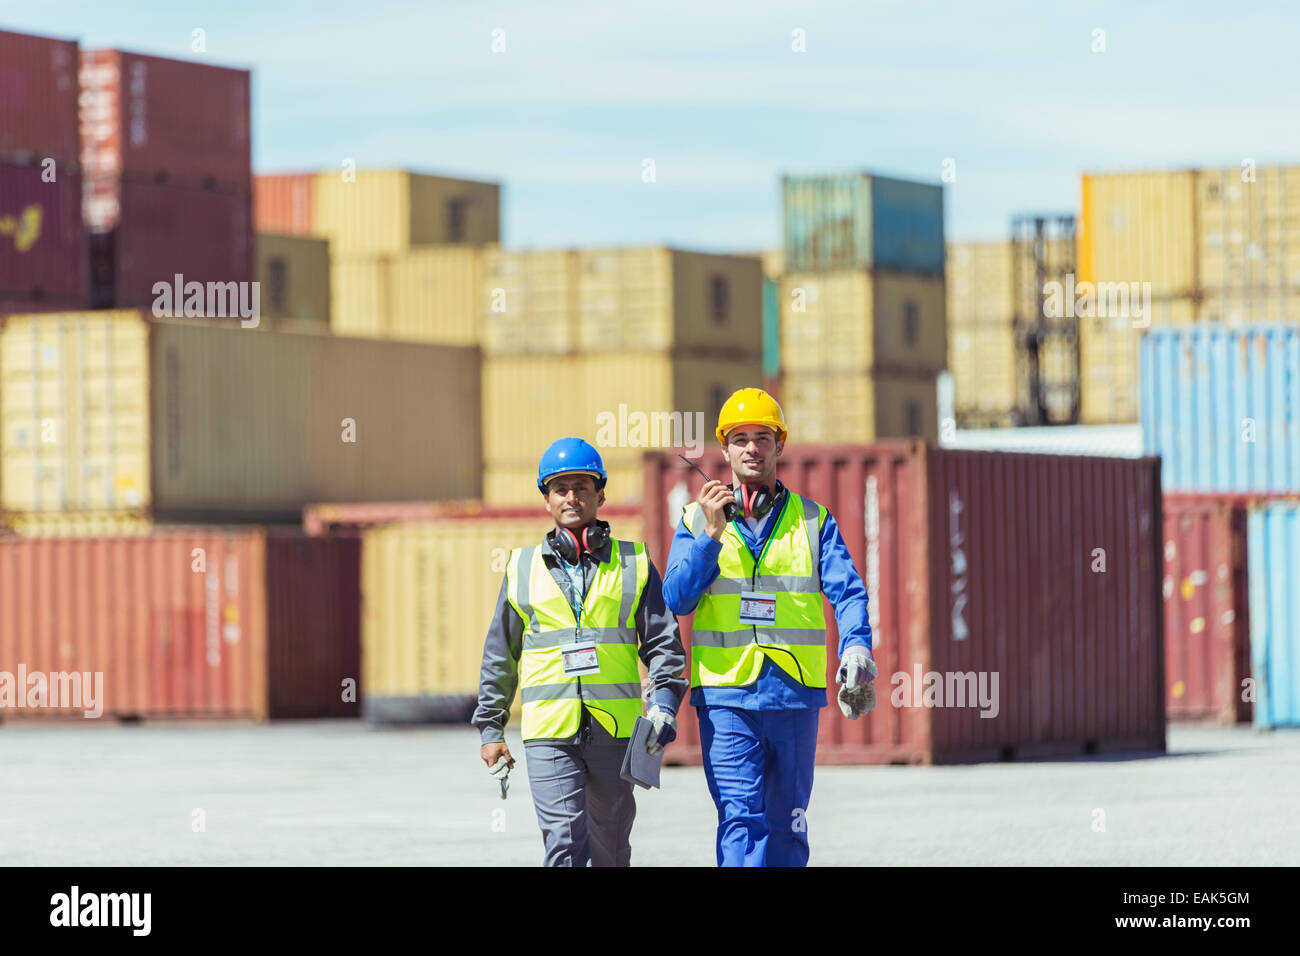 Worker and businessman walking near cargo containers Stock Photo